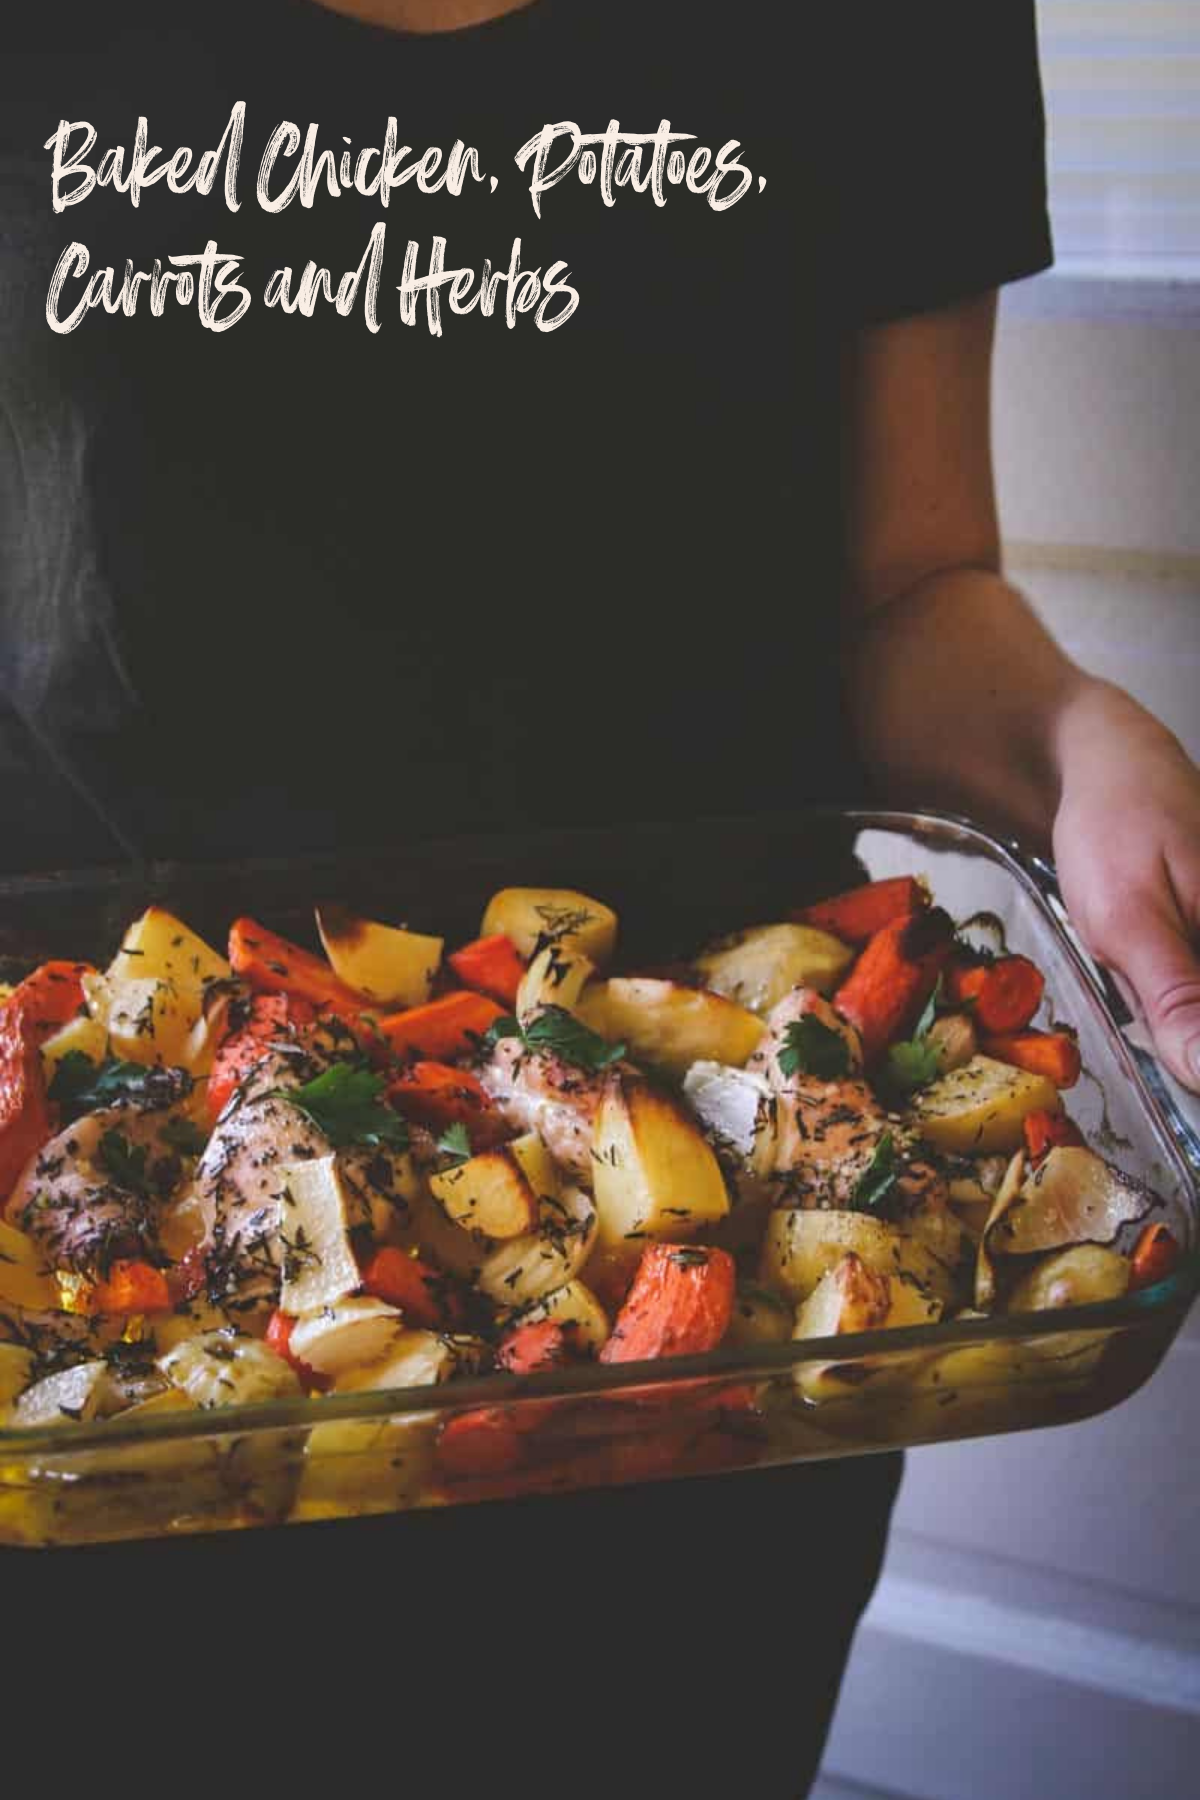 Baked chicken potatoes carrots and herbs in glass pan